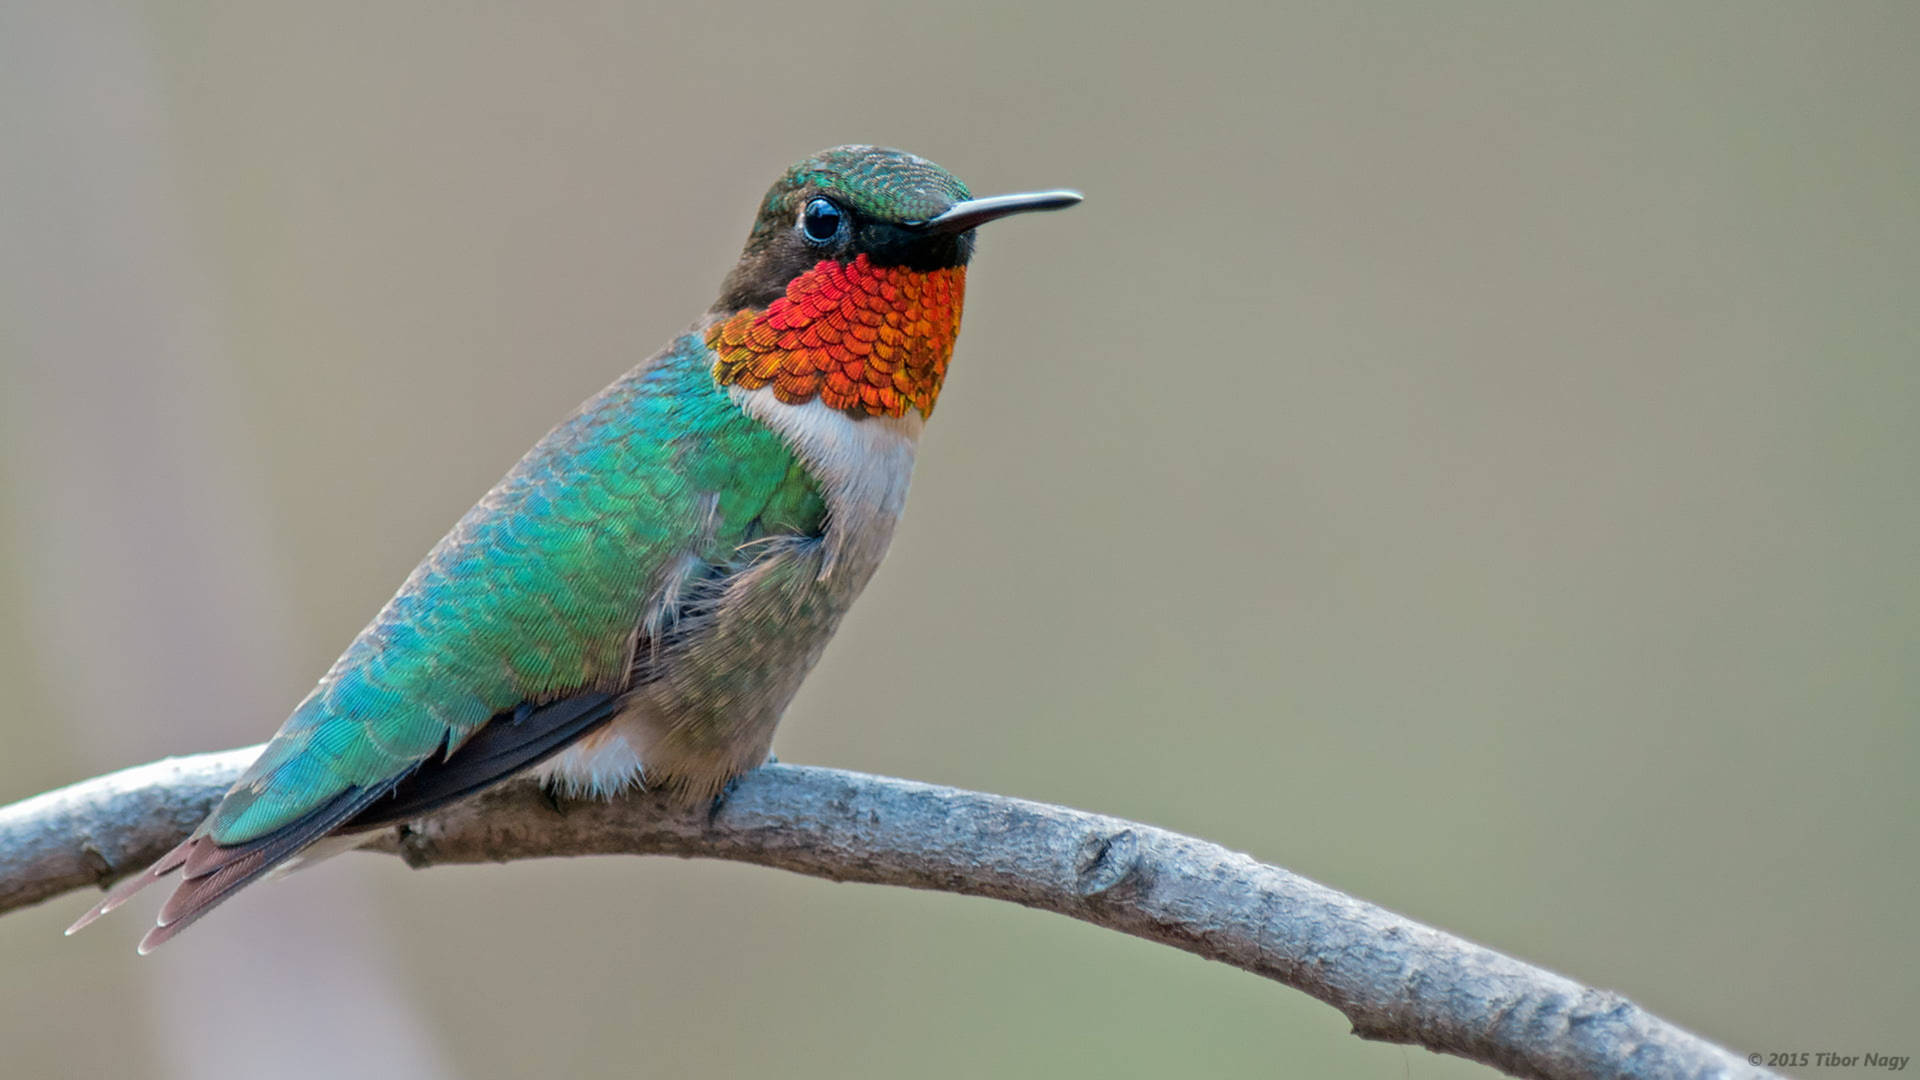 Caption: Vibrant Multicolored Hummingbird Perched On A Branch Background